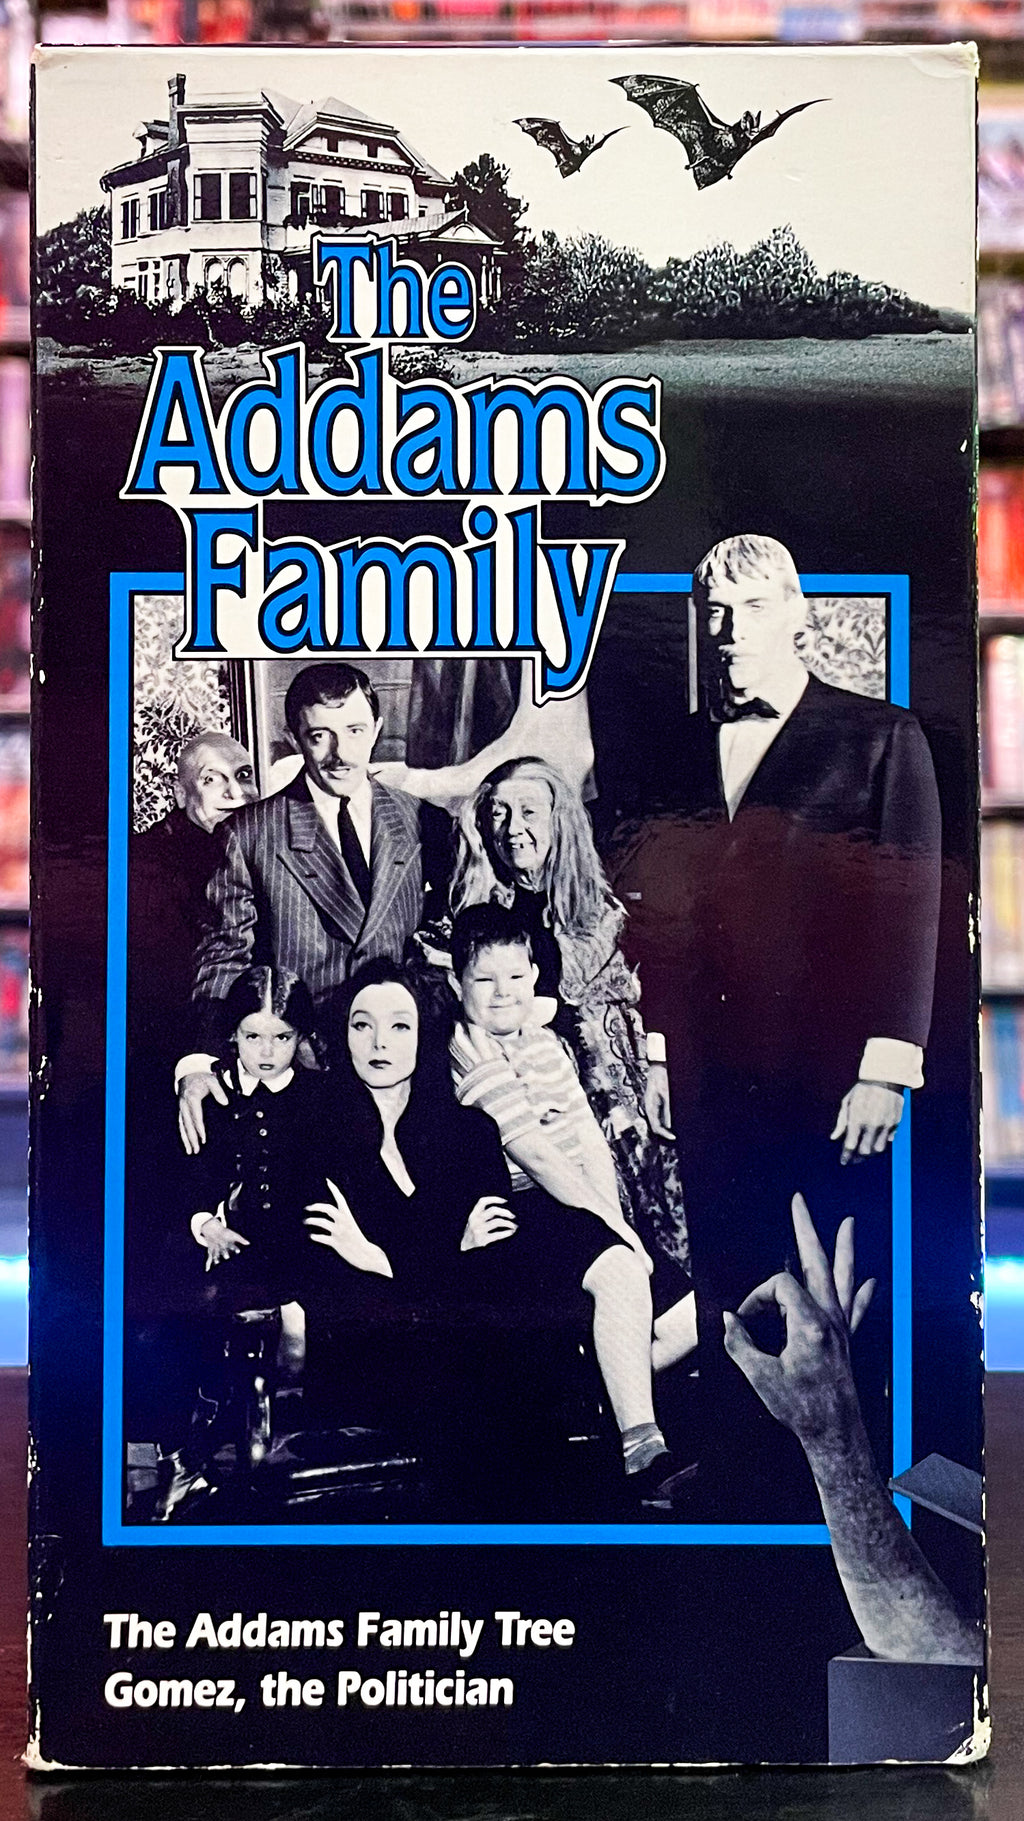 The Addams Family: The Addams Family Tree, Gomez, The Politician